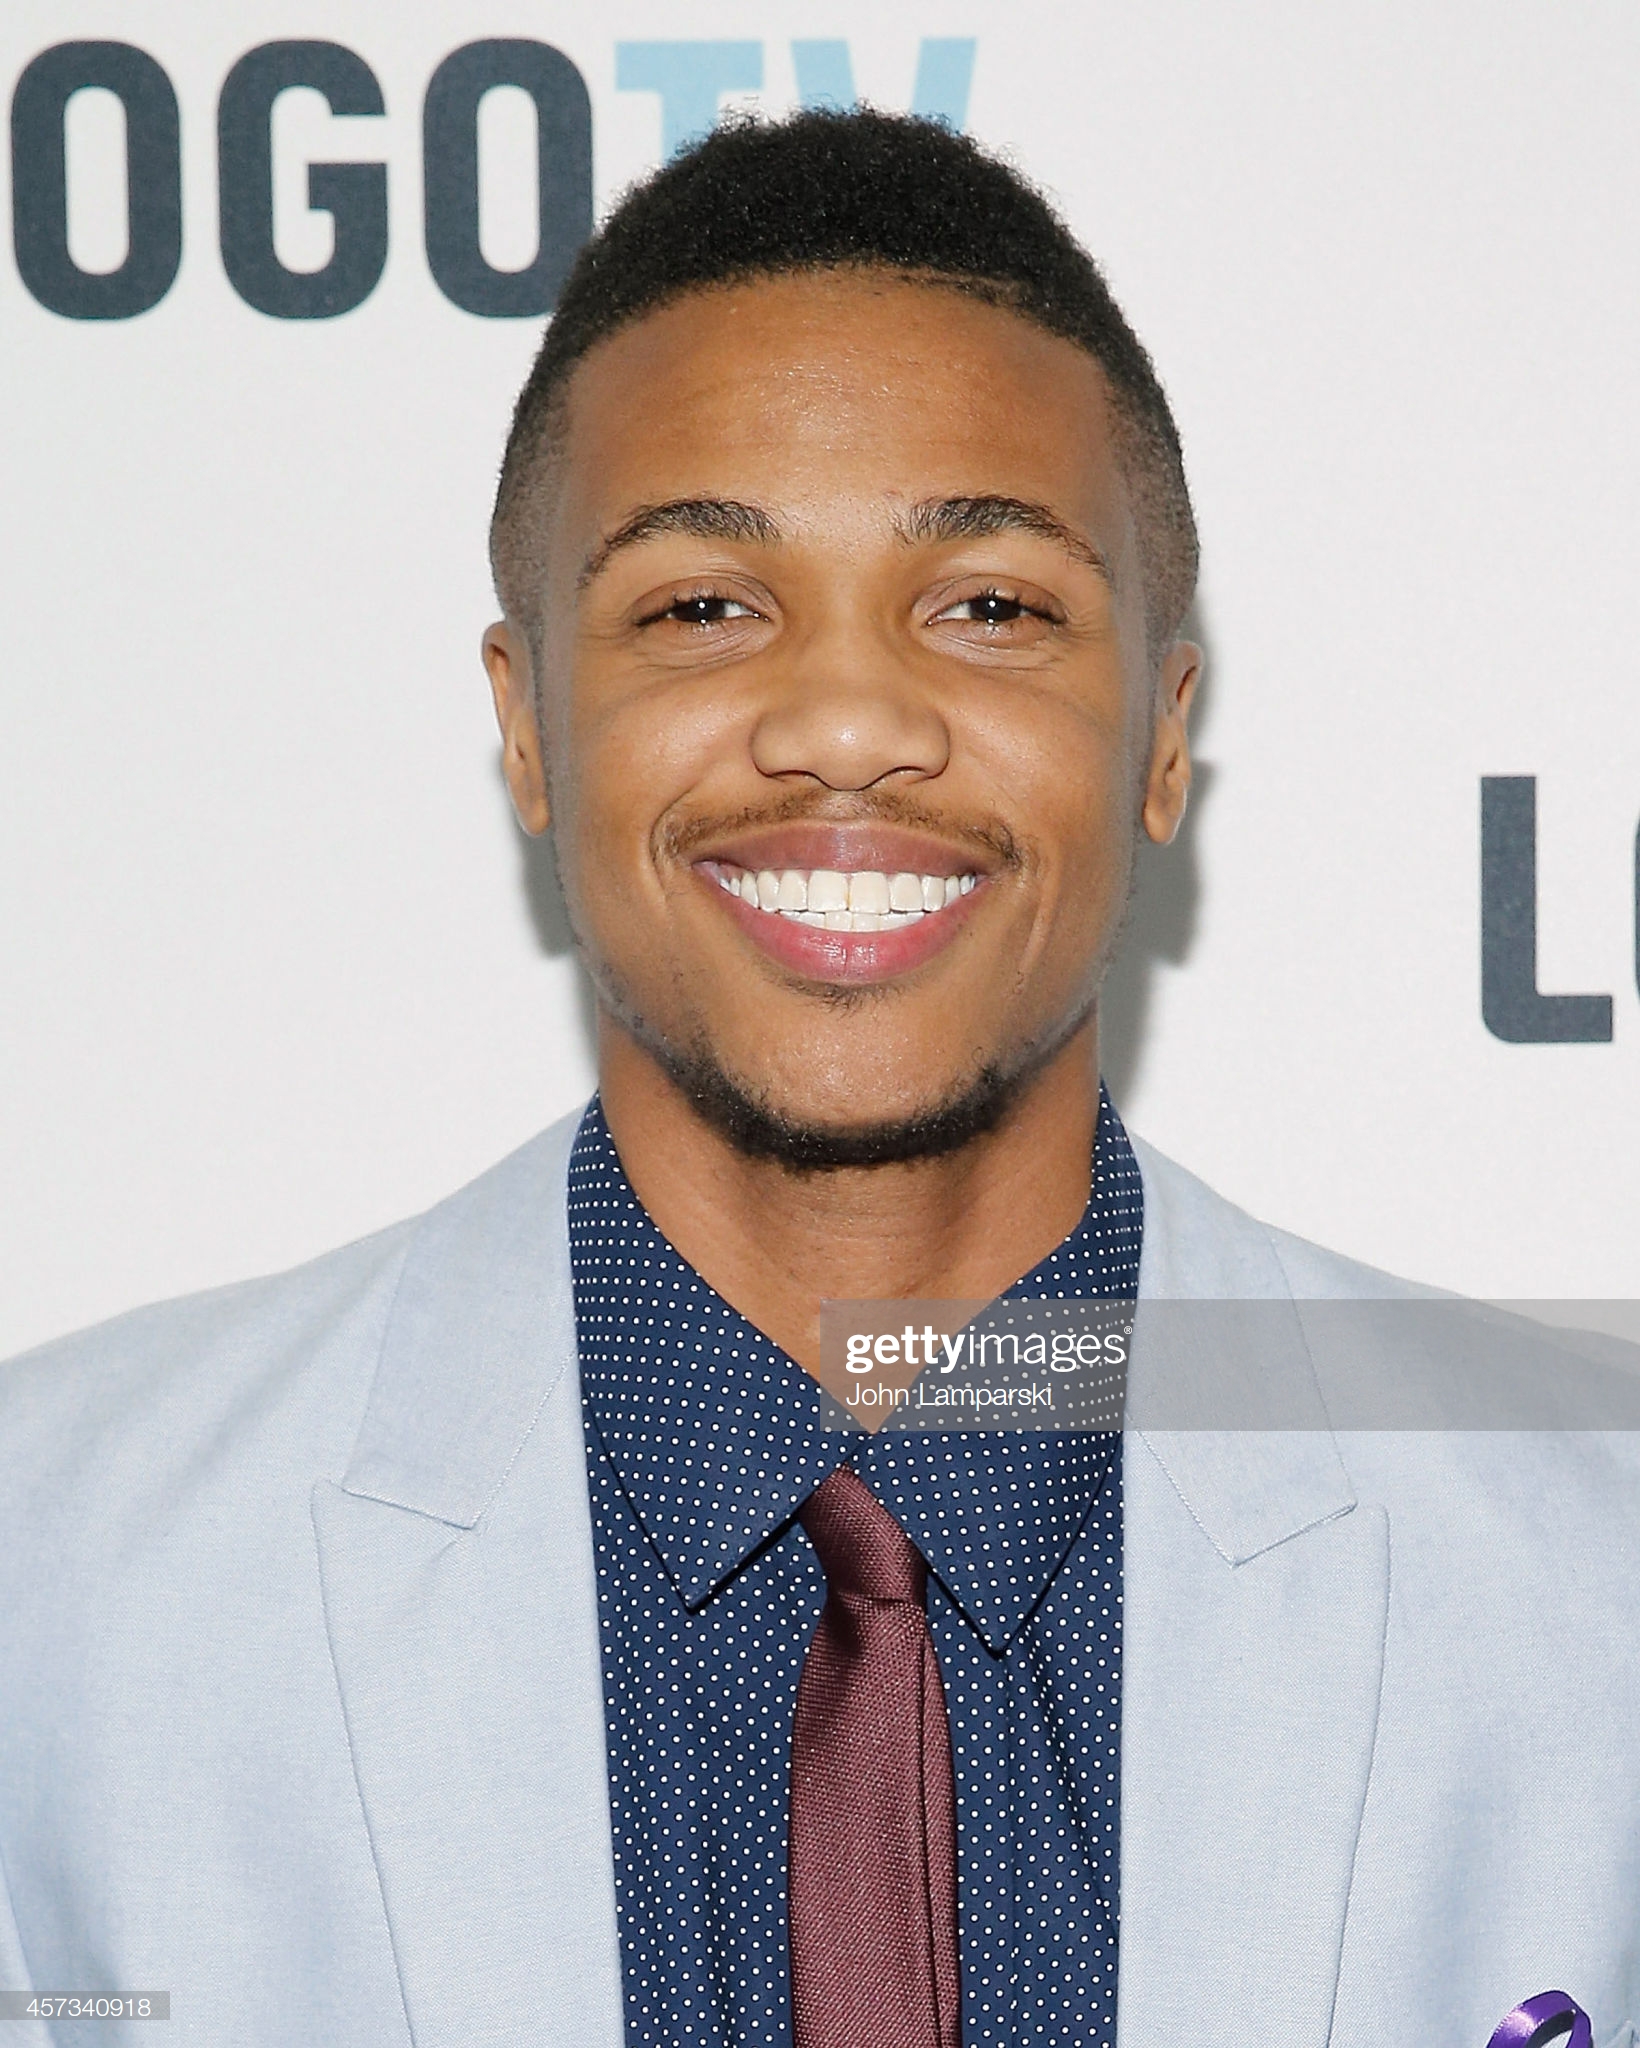 The Evolved Man of the Week: Kye Allums